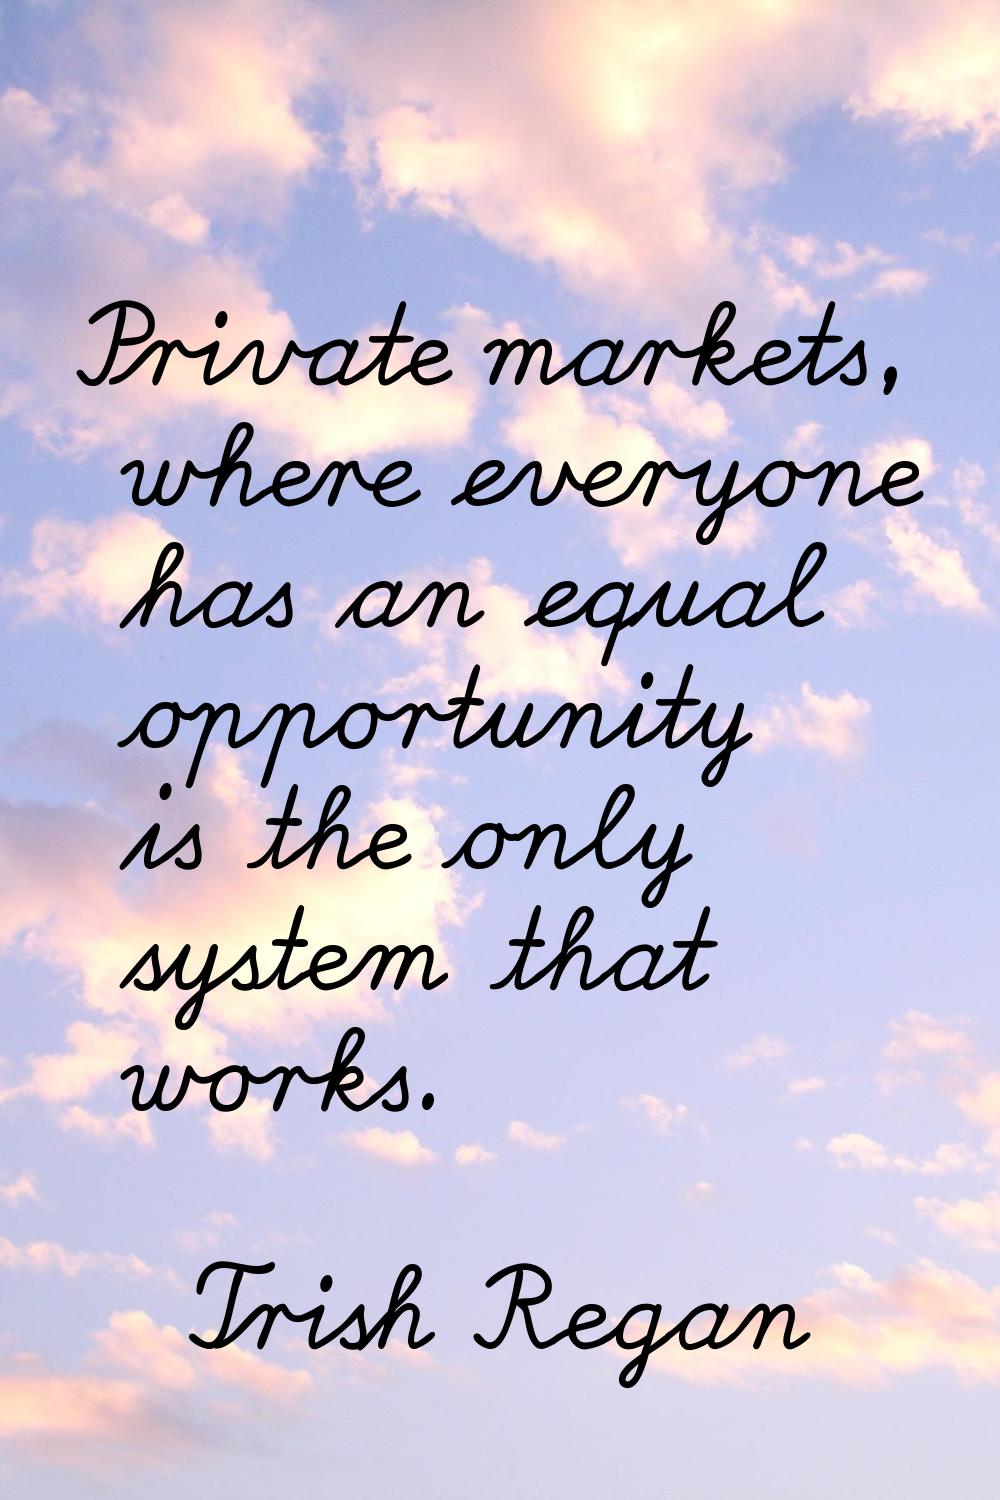 Private markets, where everyone has an equal opportunity is the only system that works.